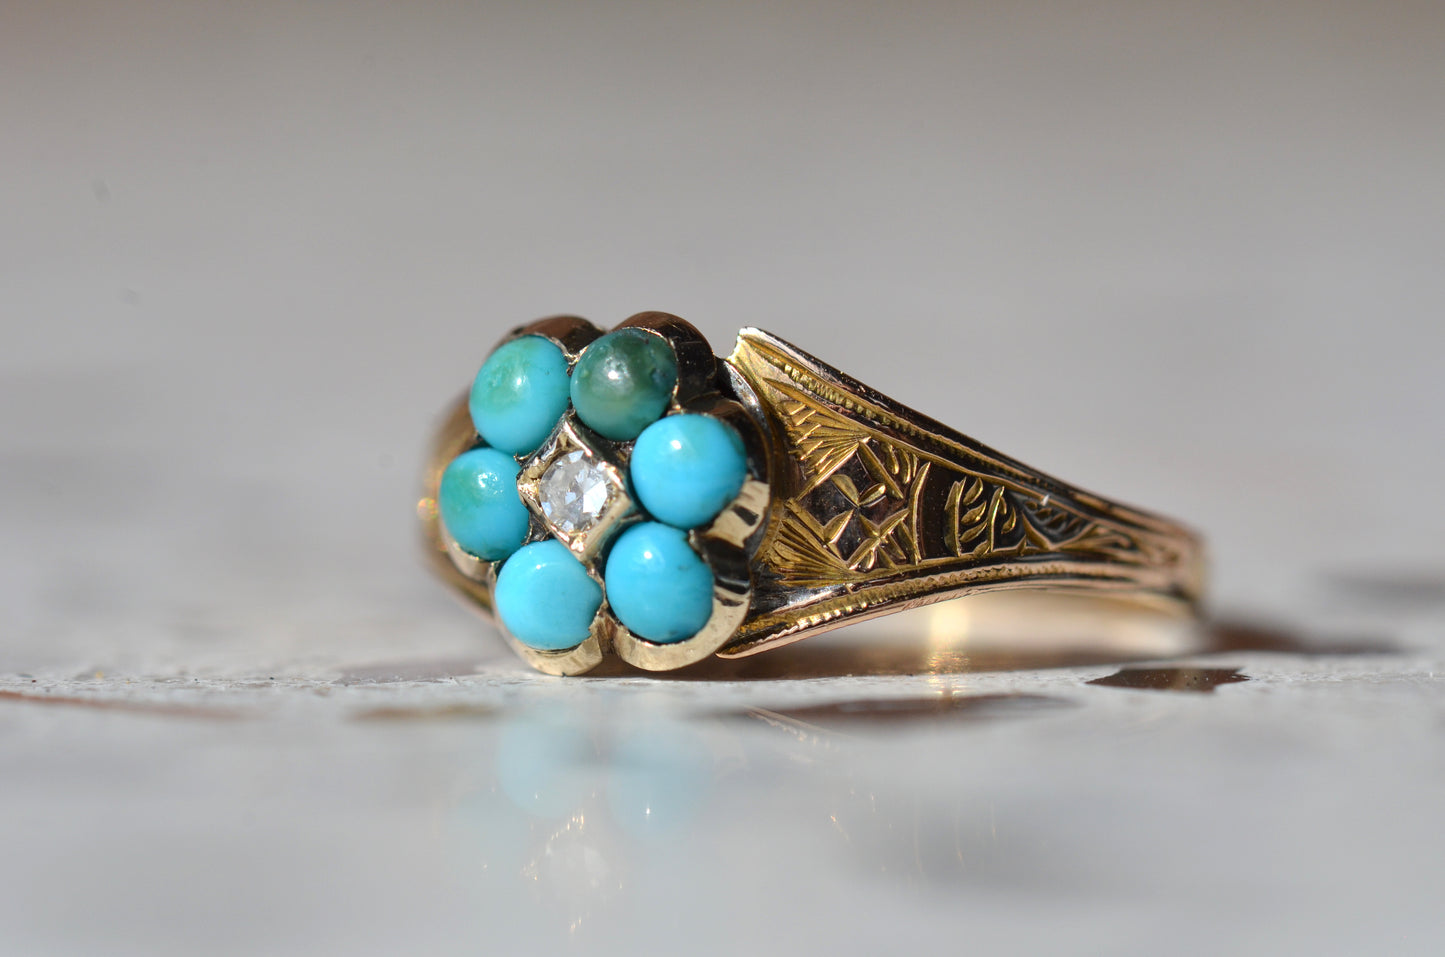 Darling Antique Turquoise Flower Ring